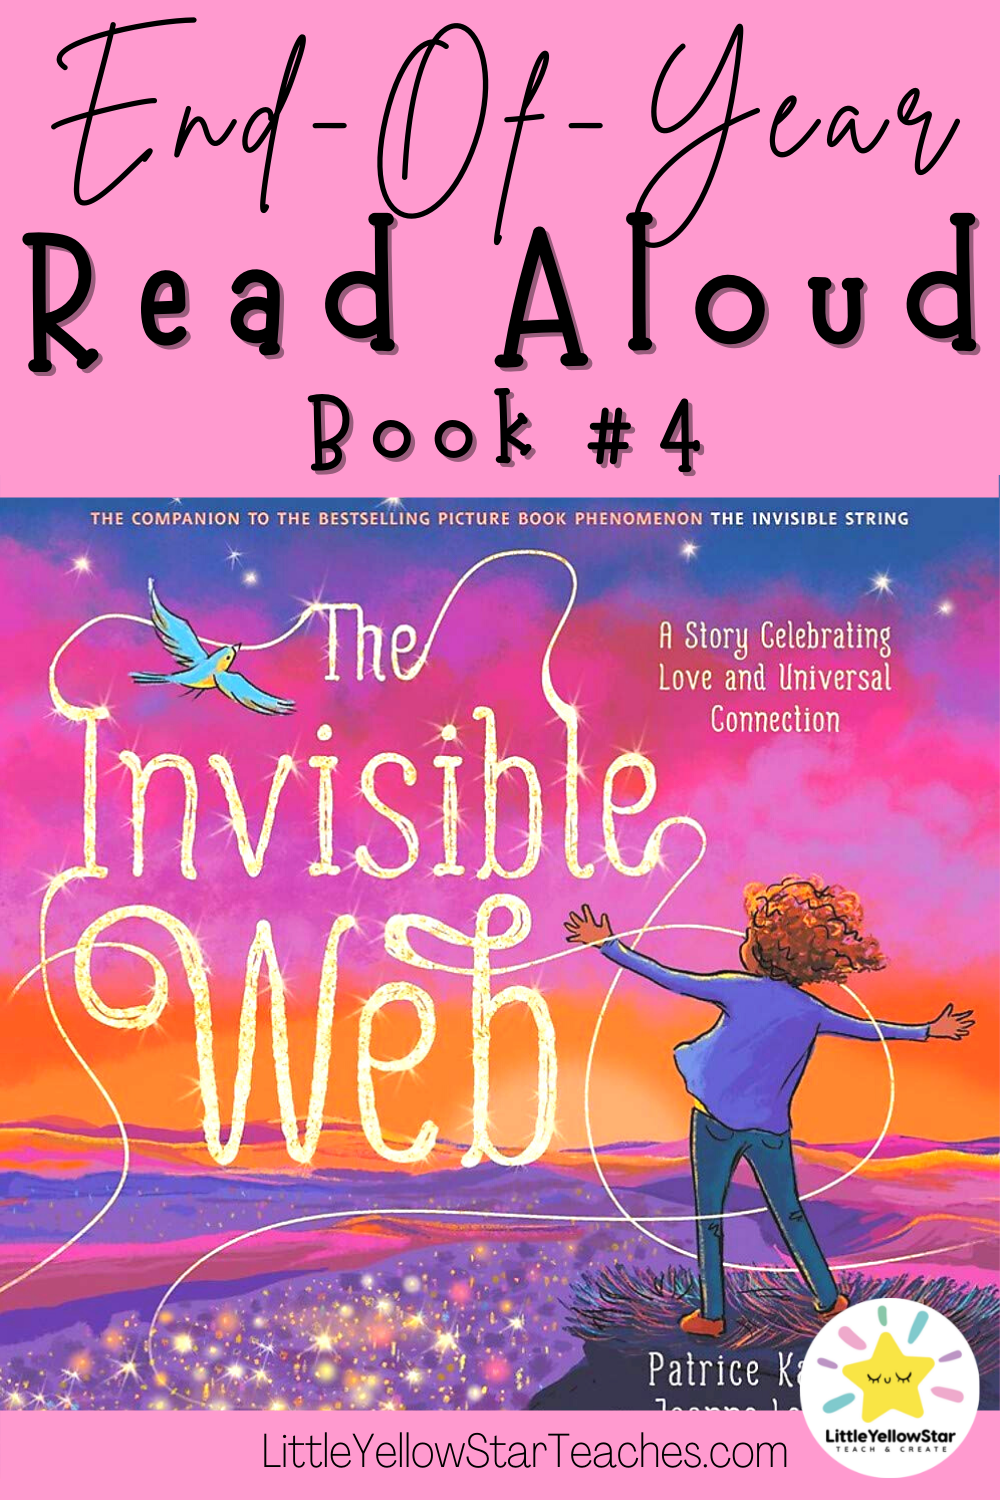 End of Year Read Aloud Book and Activities with The Invisible Web by  Patrice Karst - LittleYellowStar